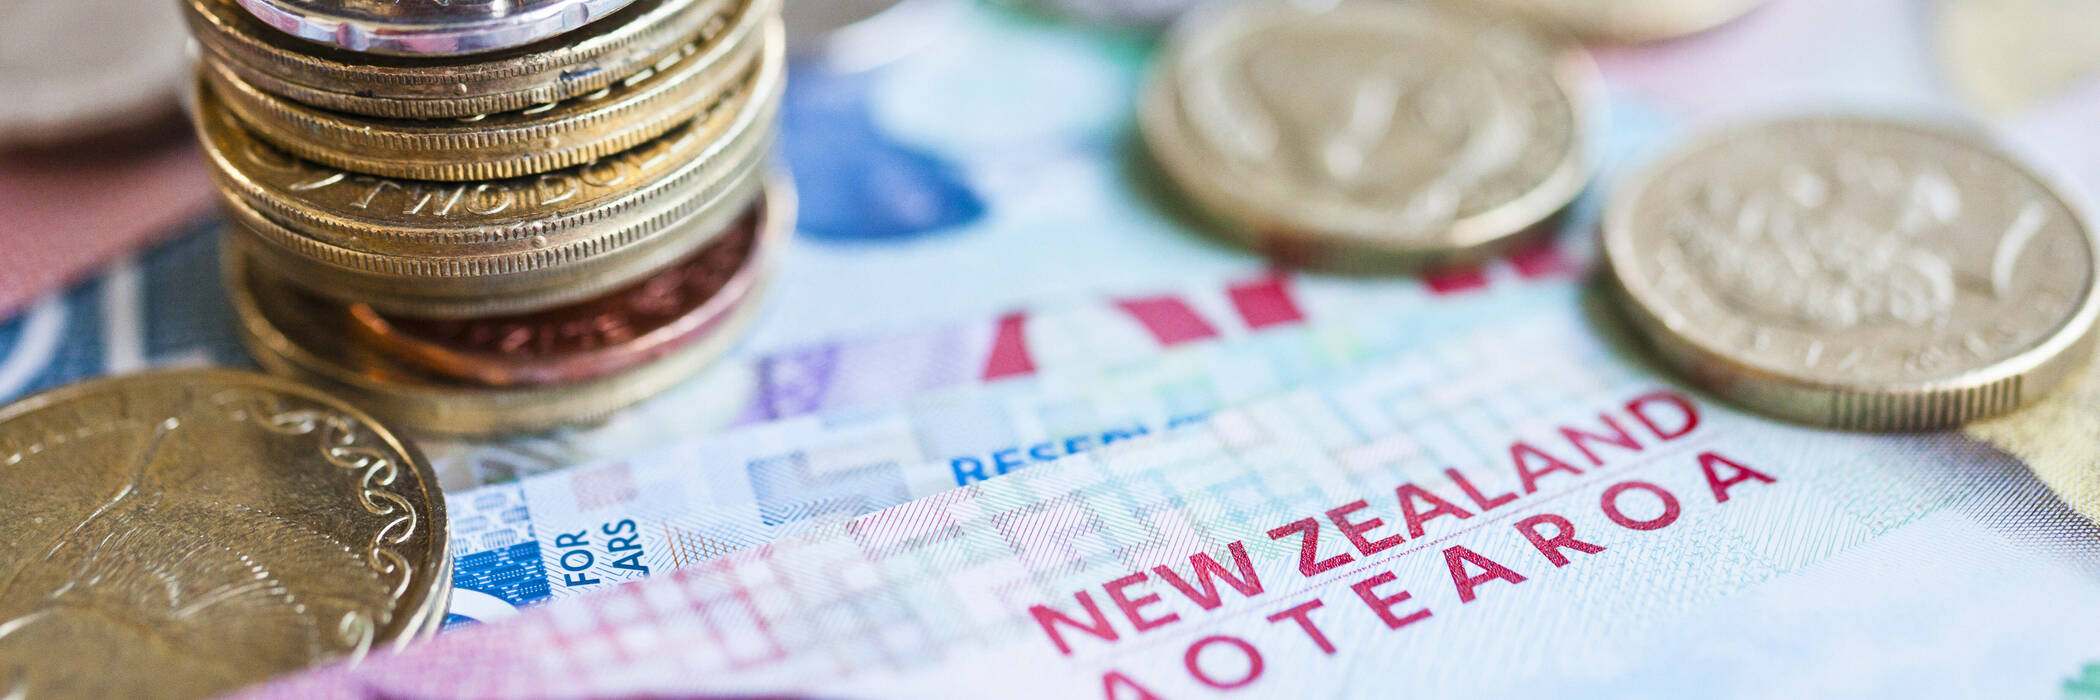 Inflation Rate in New Zealand Decreases but Remains Above Target